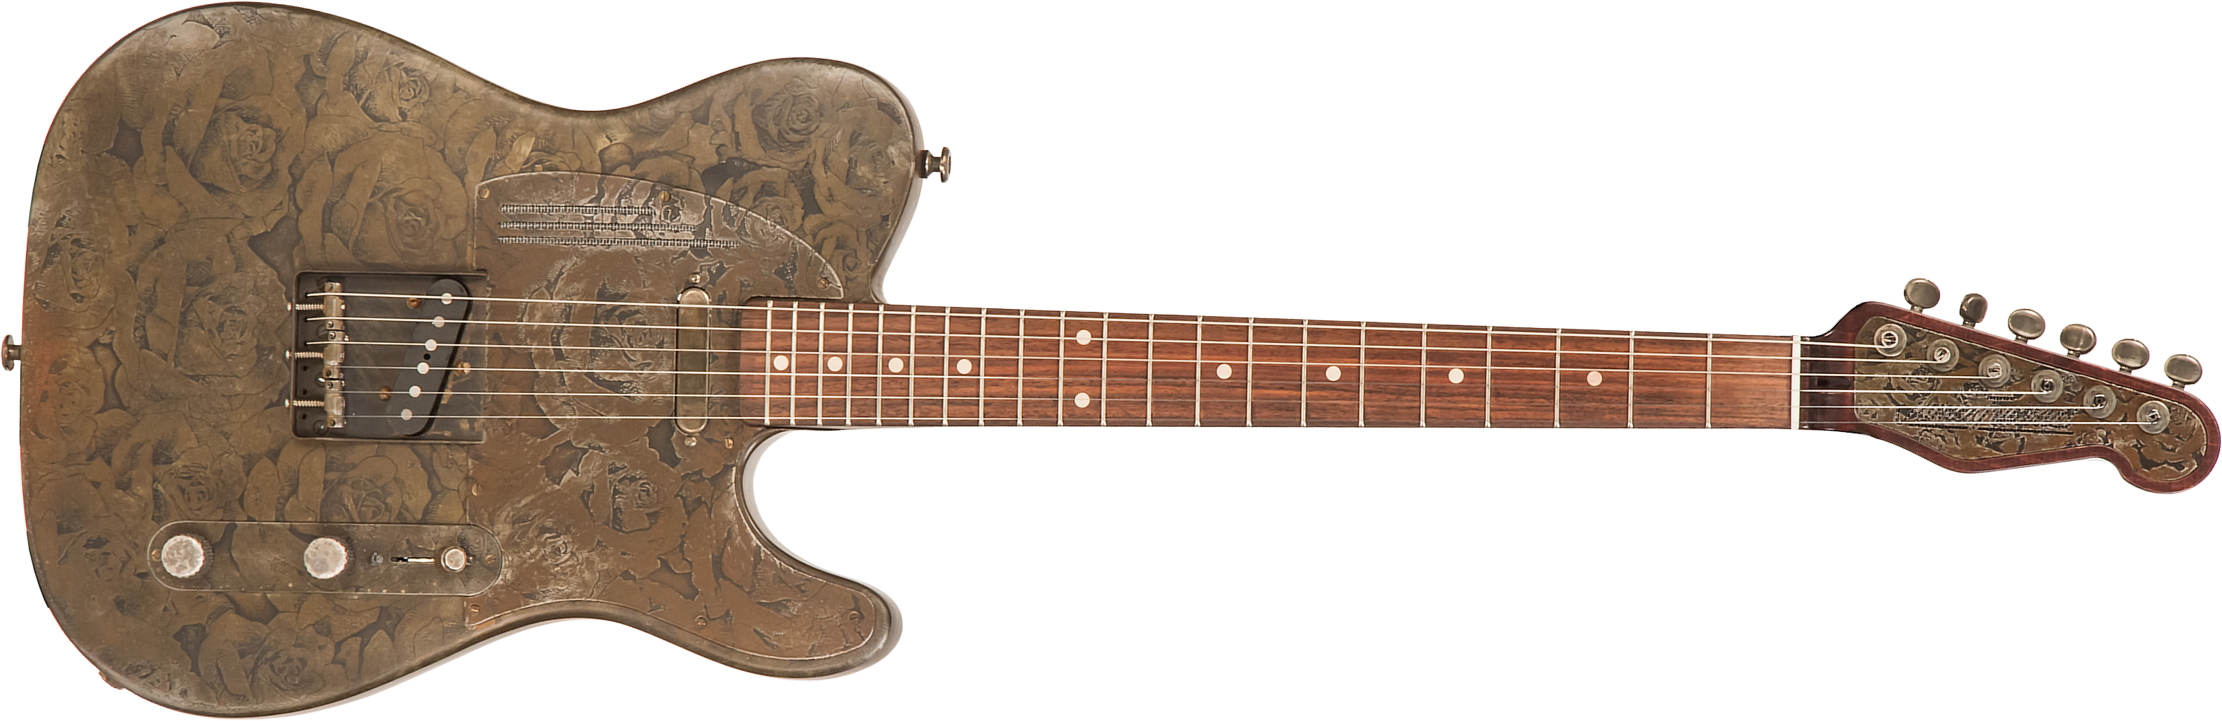 James Trussart Steelcaster Perf.back 2s Ht Rw #21000 - Rusty Roses - Semi-Hollow E-Gitarre - Main picture